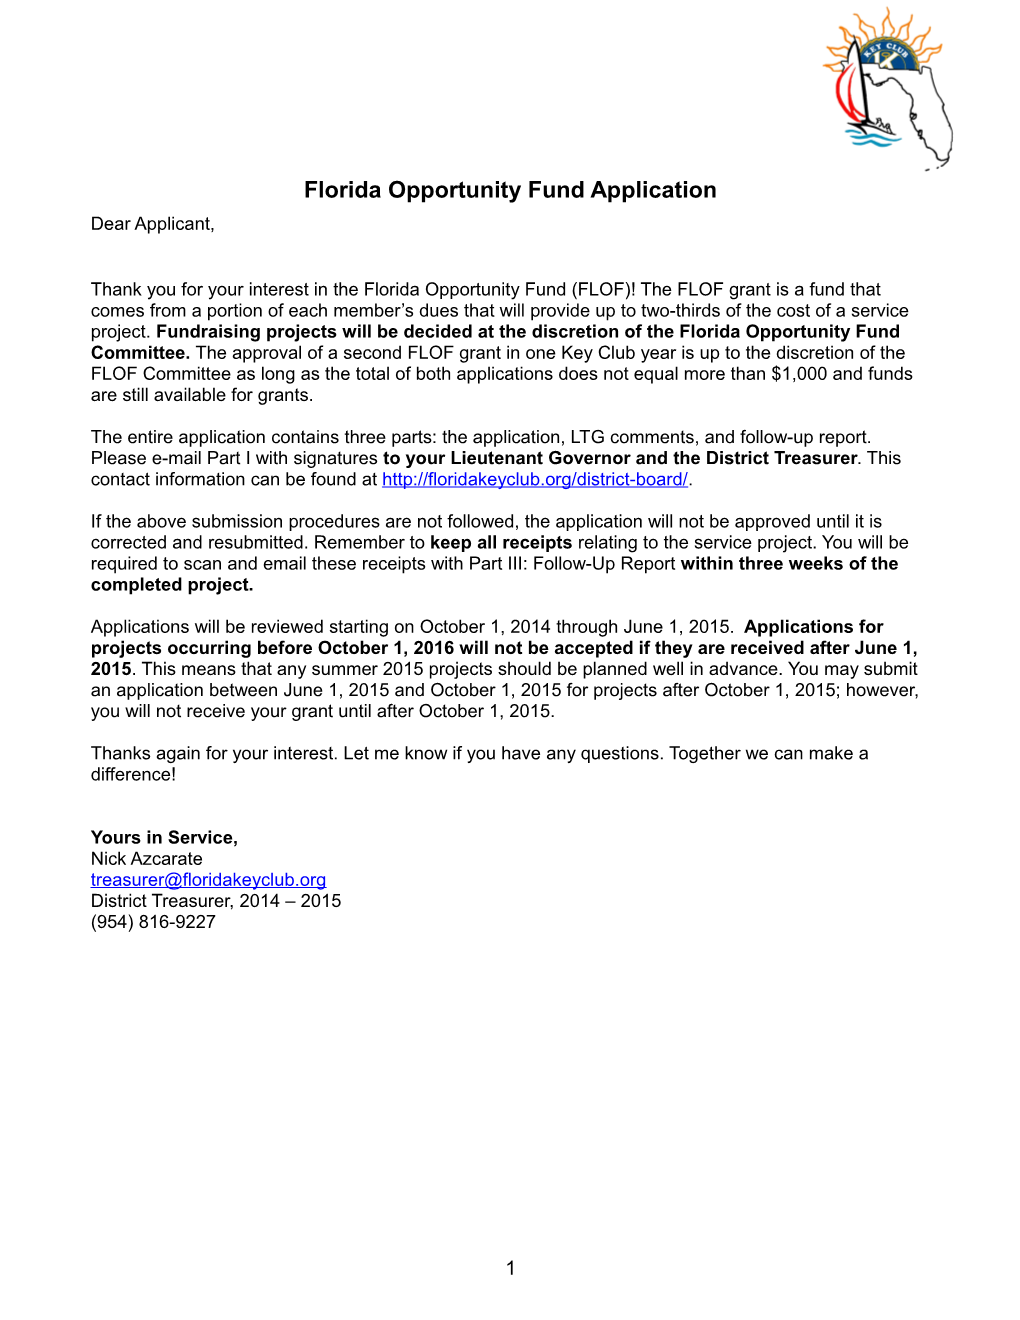 Florida Opportunity Fund Grant Application